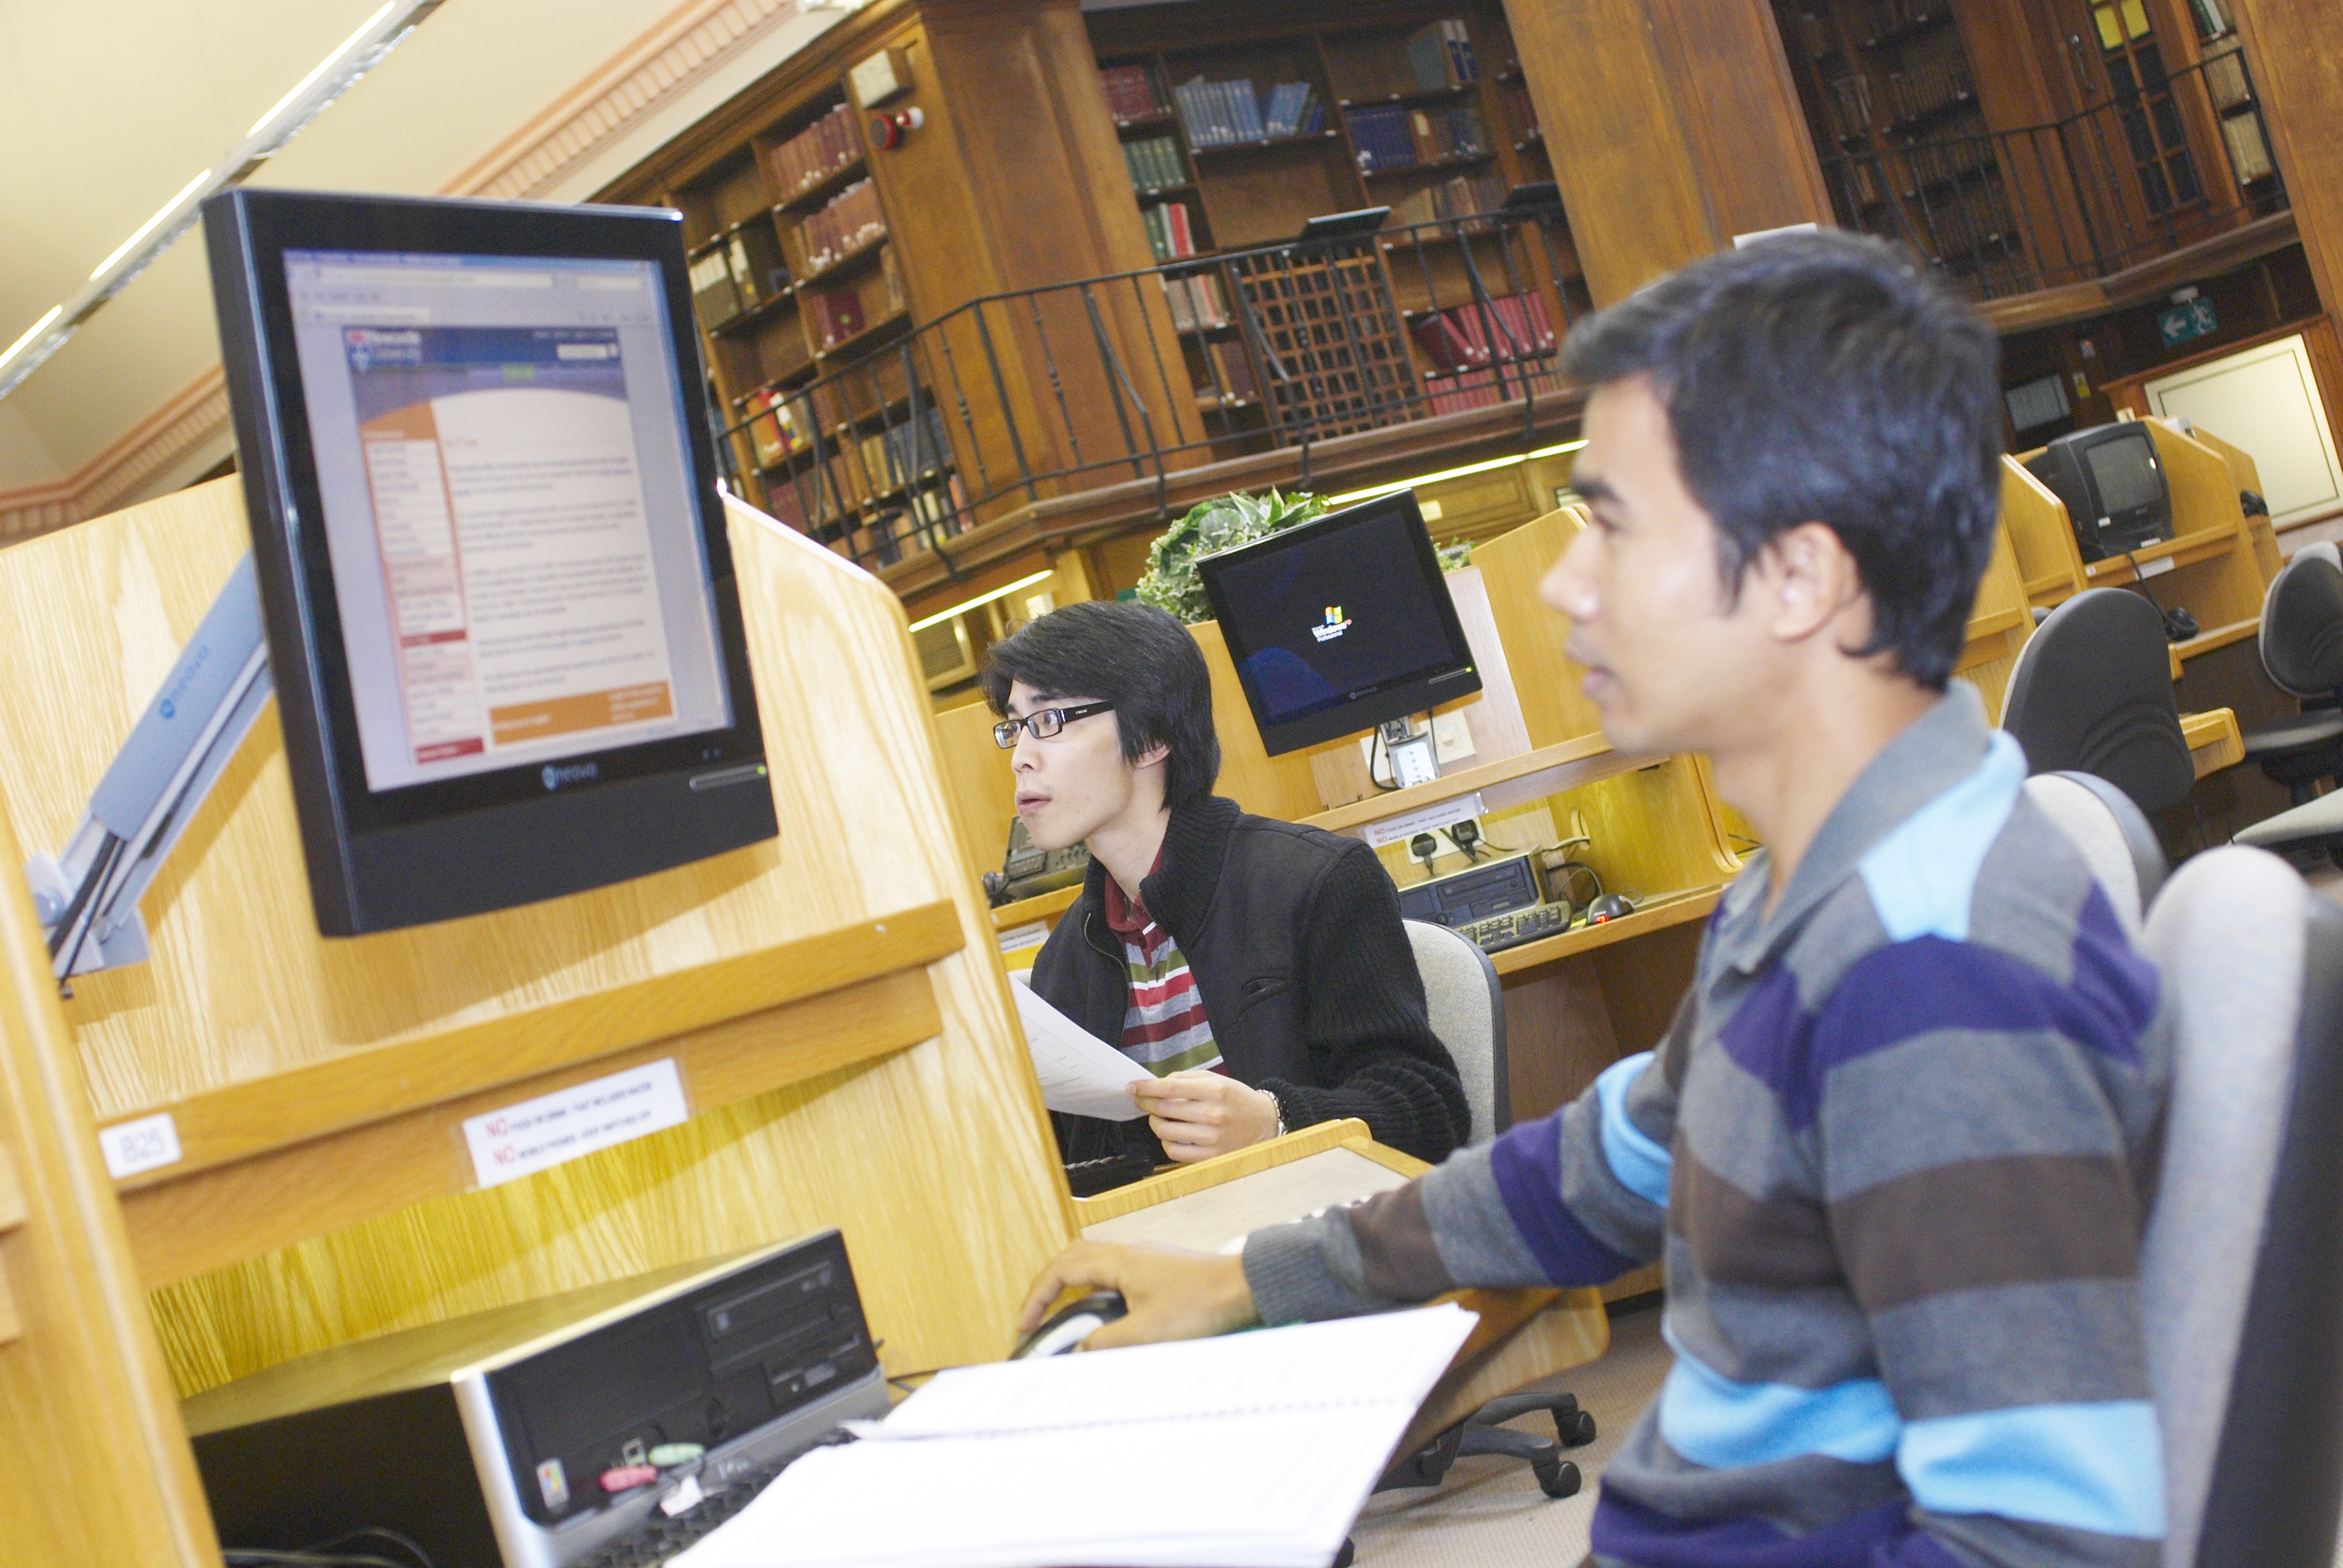 Students working on computer in Newcastle University Old Library Building